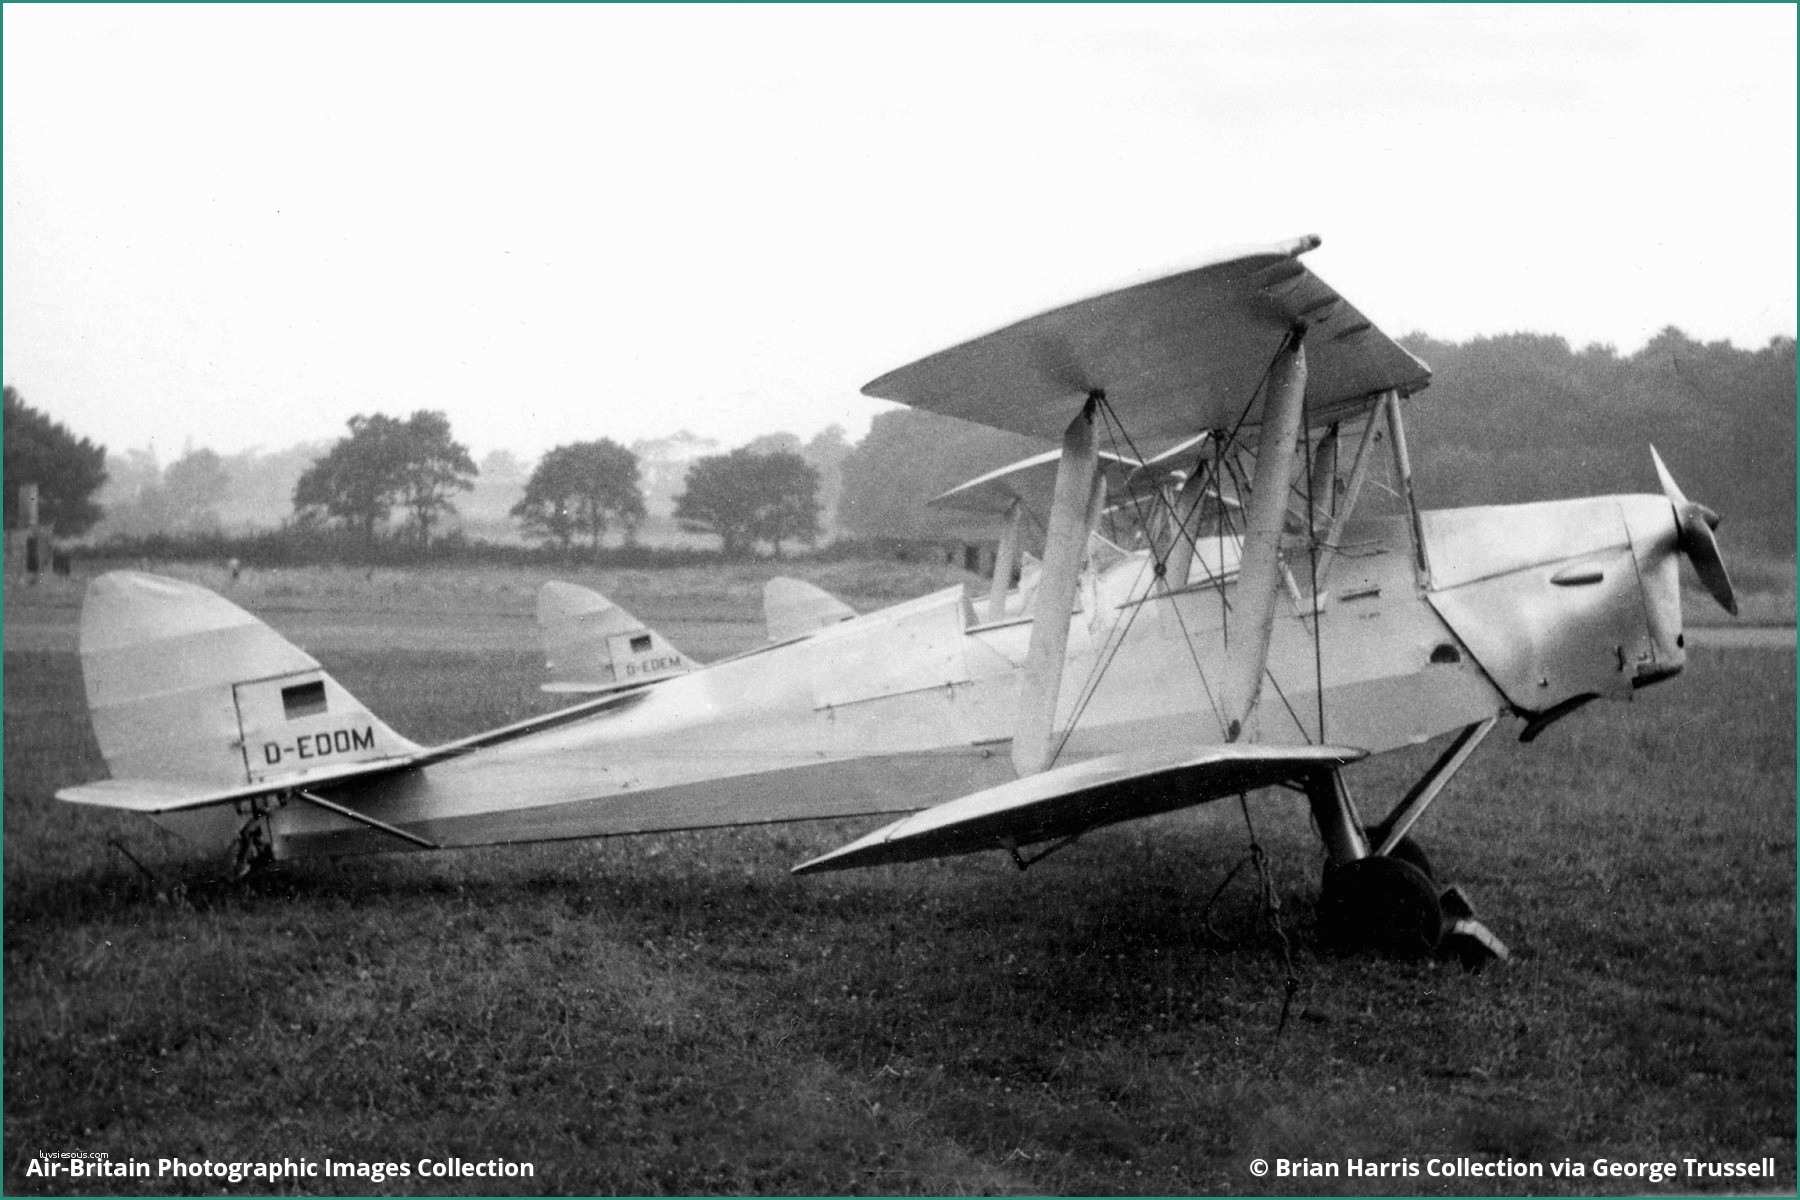 Leroy Merlin Stampe E Abpic